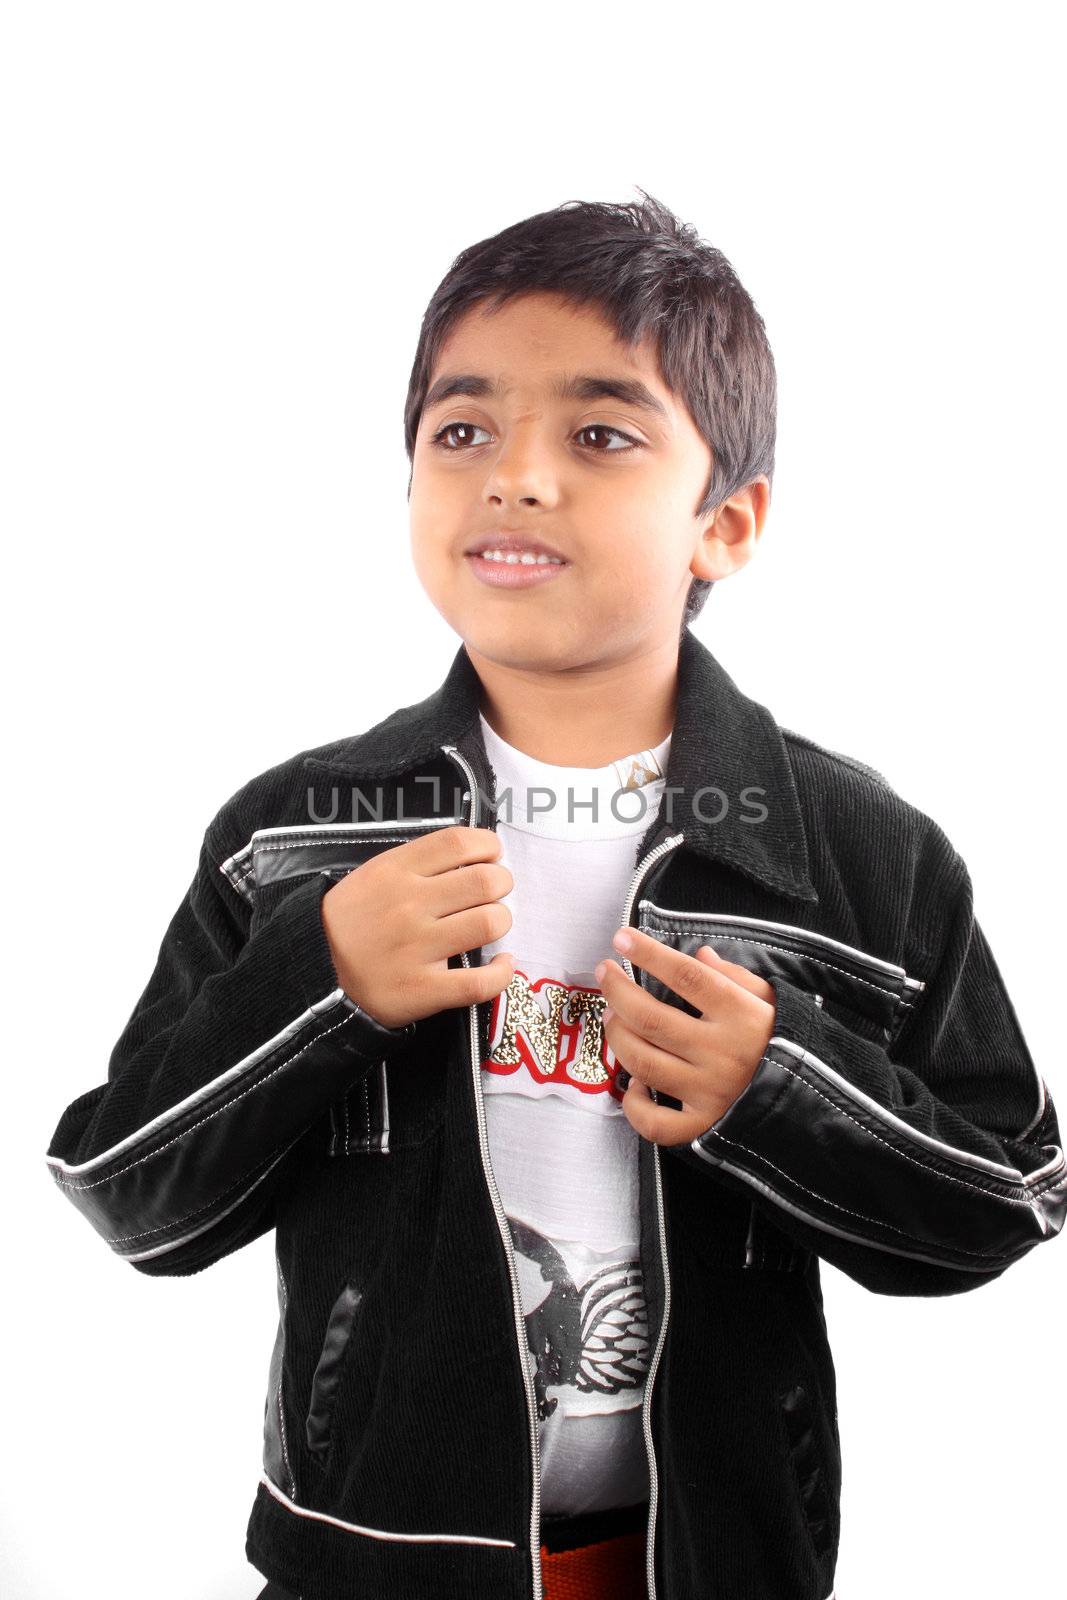 A little Indiian boy wearing a jacket getting ready for a party, on white studio background.